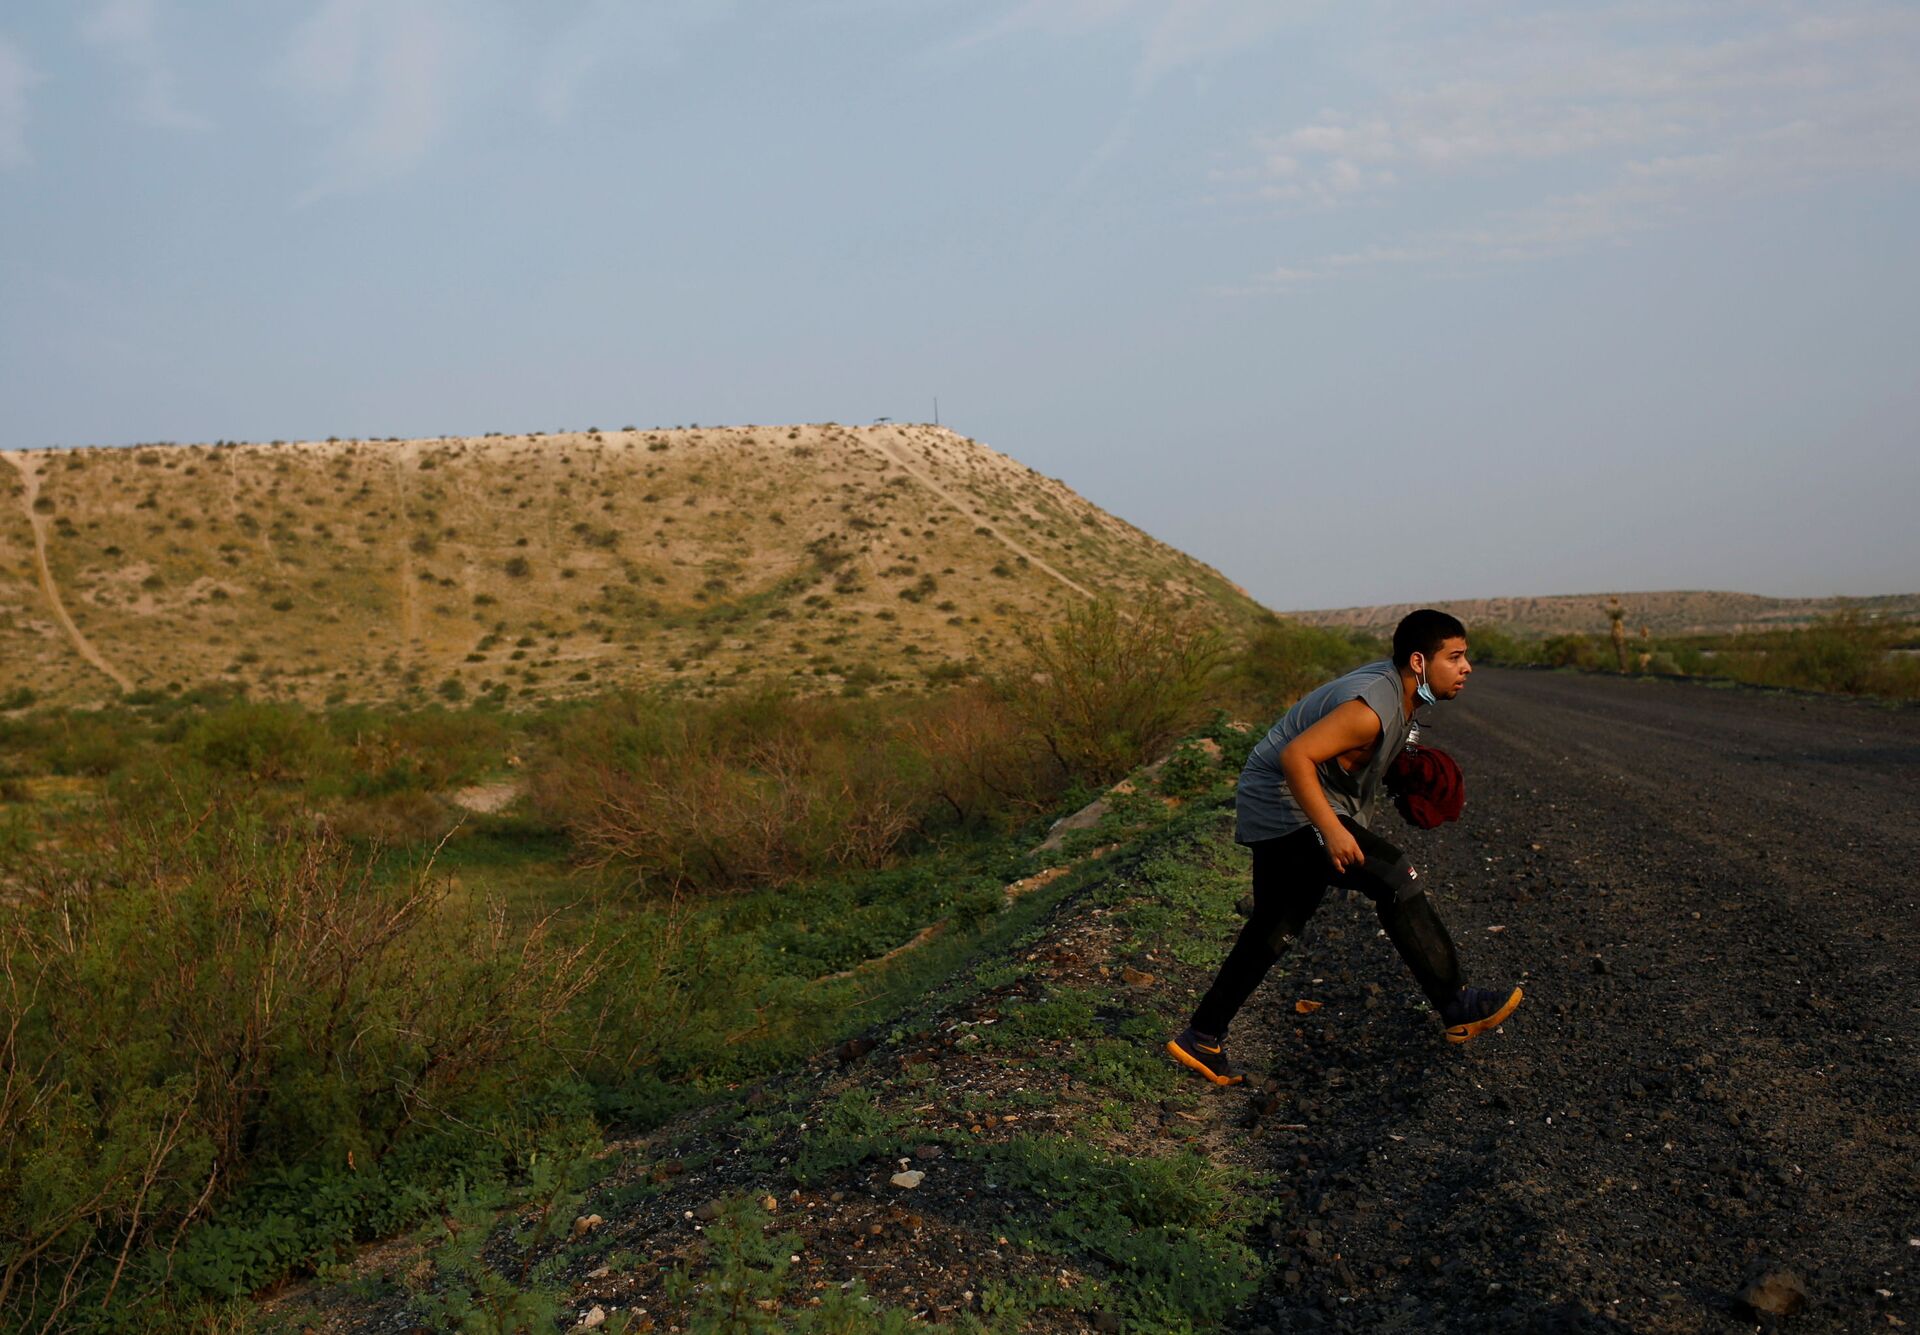 A migrant from Guatemala runs to hide from U.S. Border Patrol after crossing into the United States from Mexico, in Sunland Park, New Mexico, U.S., July 22, 2021 - Sputnik International, 1920, 30.09.2021